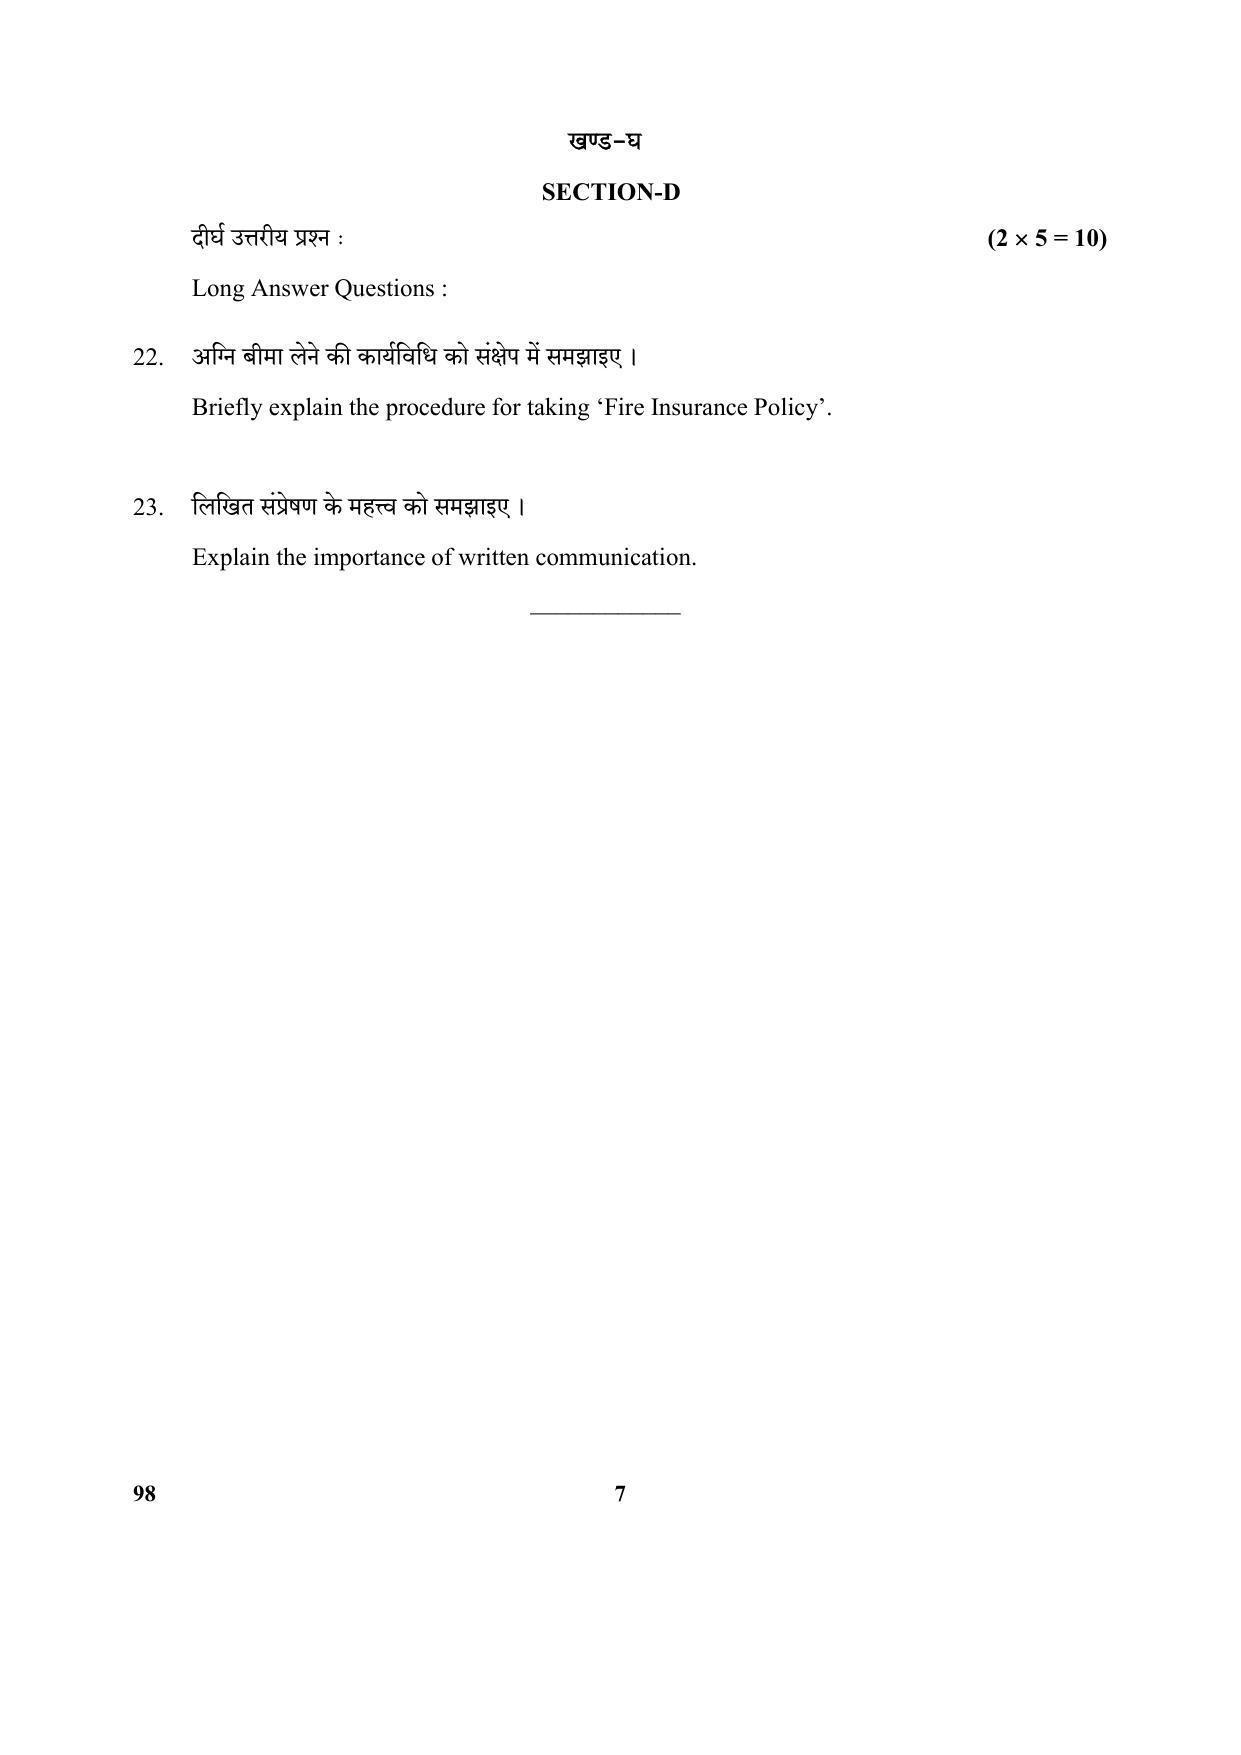 CBSE Class 10 98 (Banking & Insurance) 2018 Question Paper - Page 7